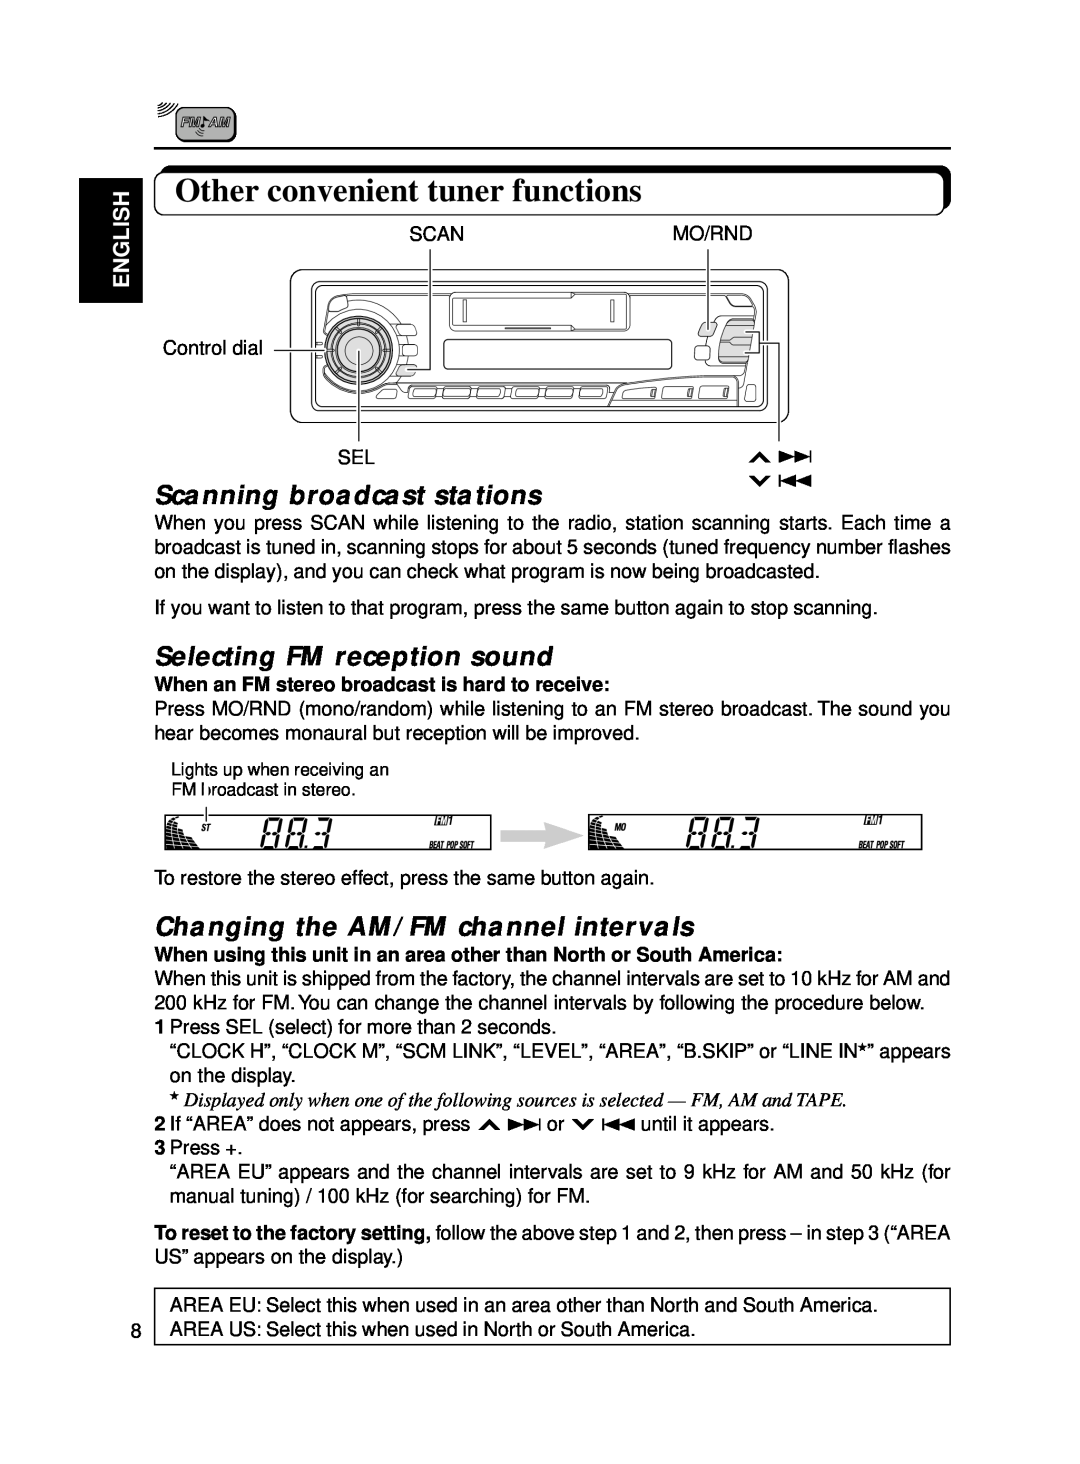 JVC KS-FX250 manual Other convenient tuner functions, Scanning broadcast stations, Selecting FM reception sound, English 